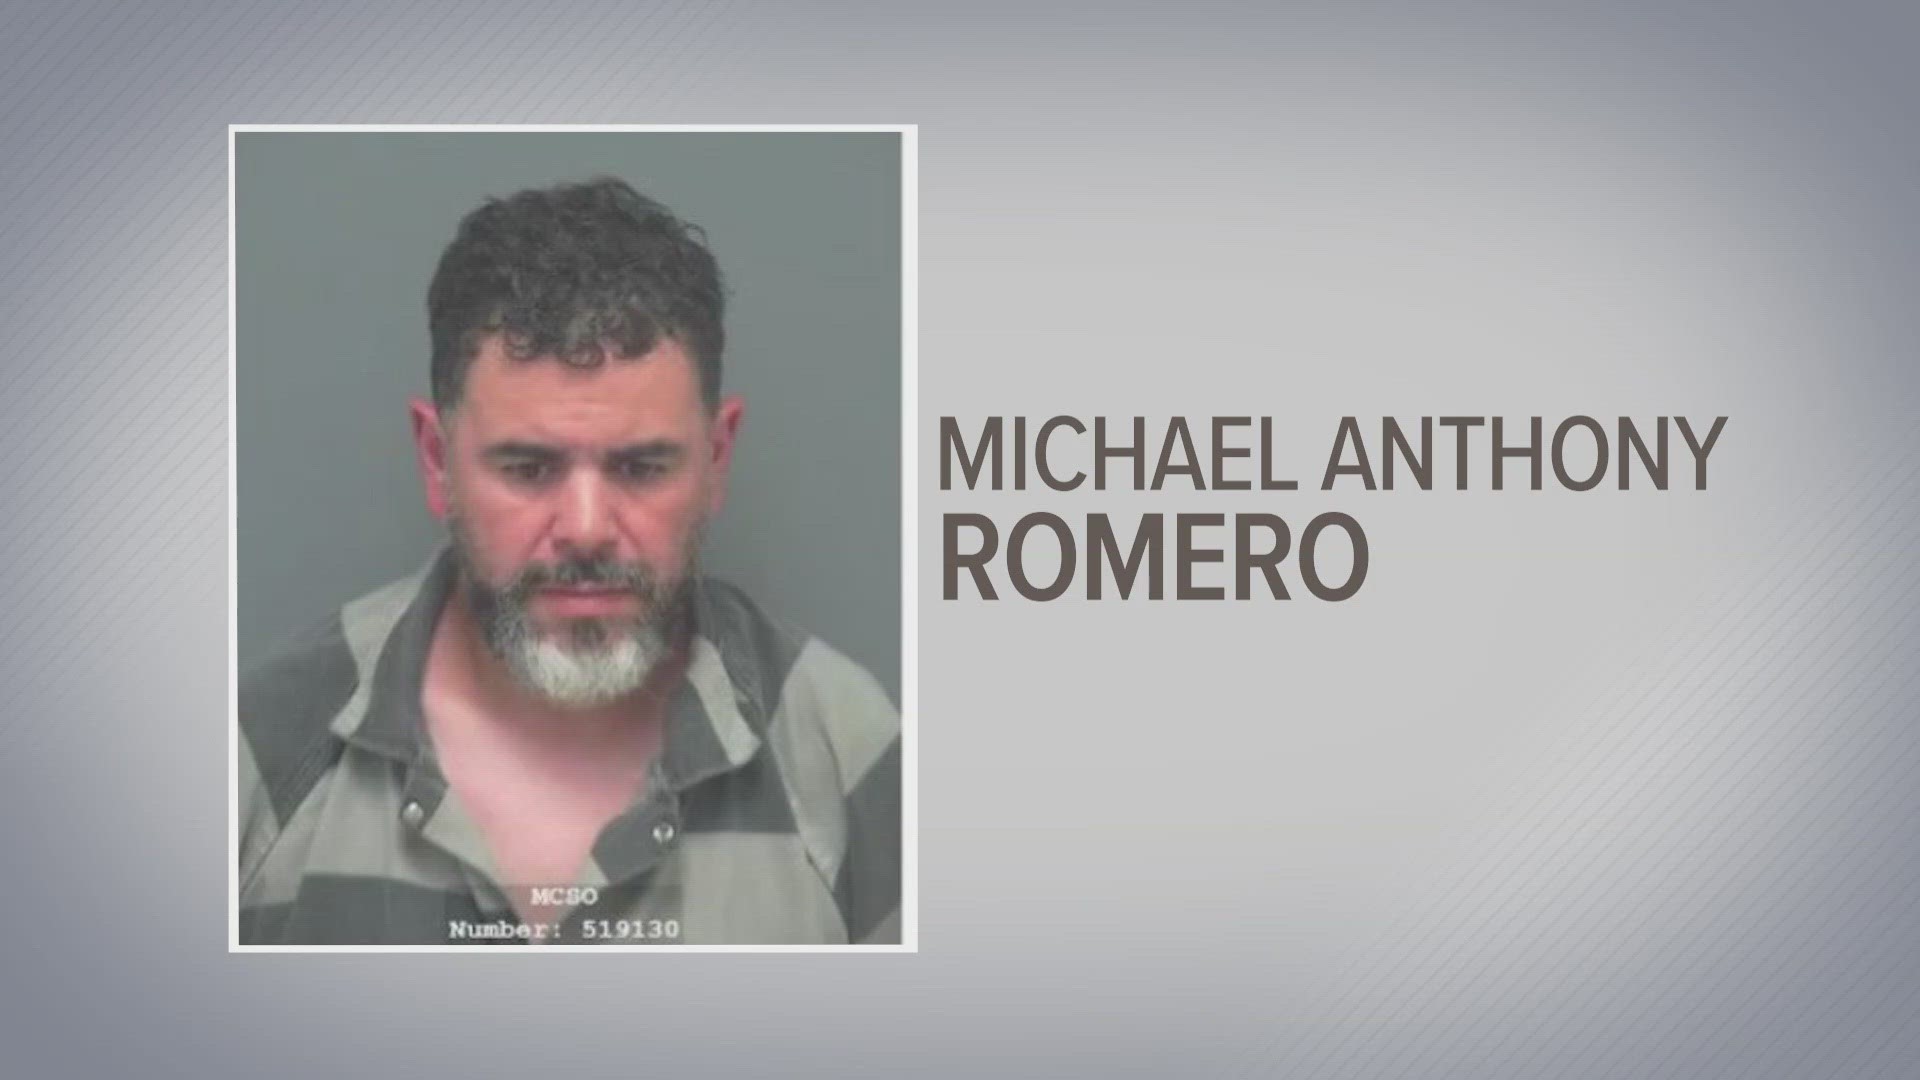 Michael Anthony Romero showed up at the police department and admitted he fondled teen boys at First Baptist Church in Magnolia from 2002-2014, police say.